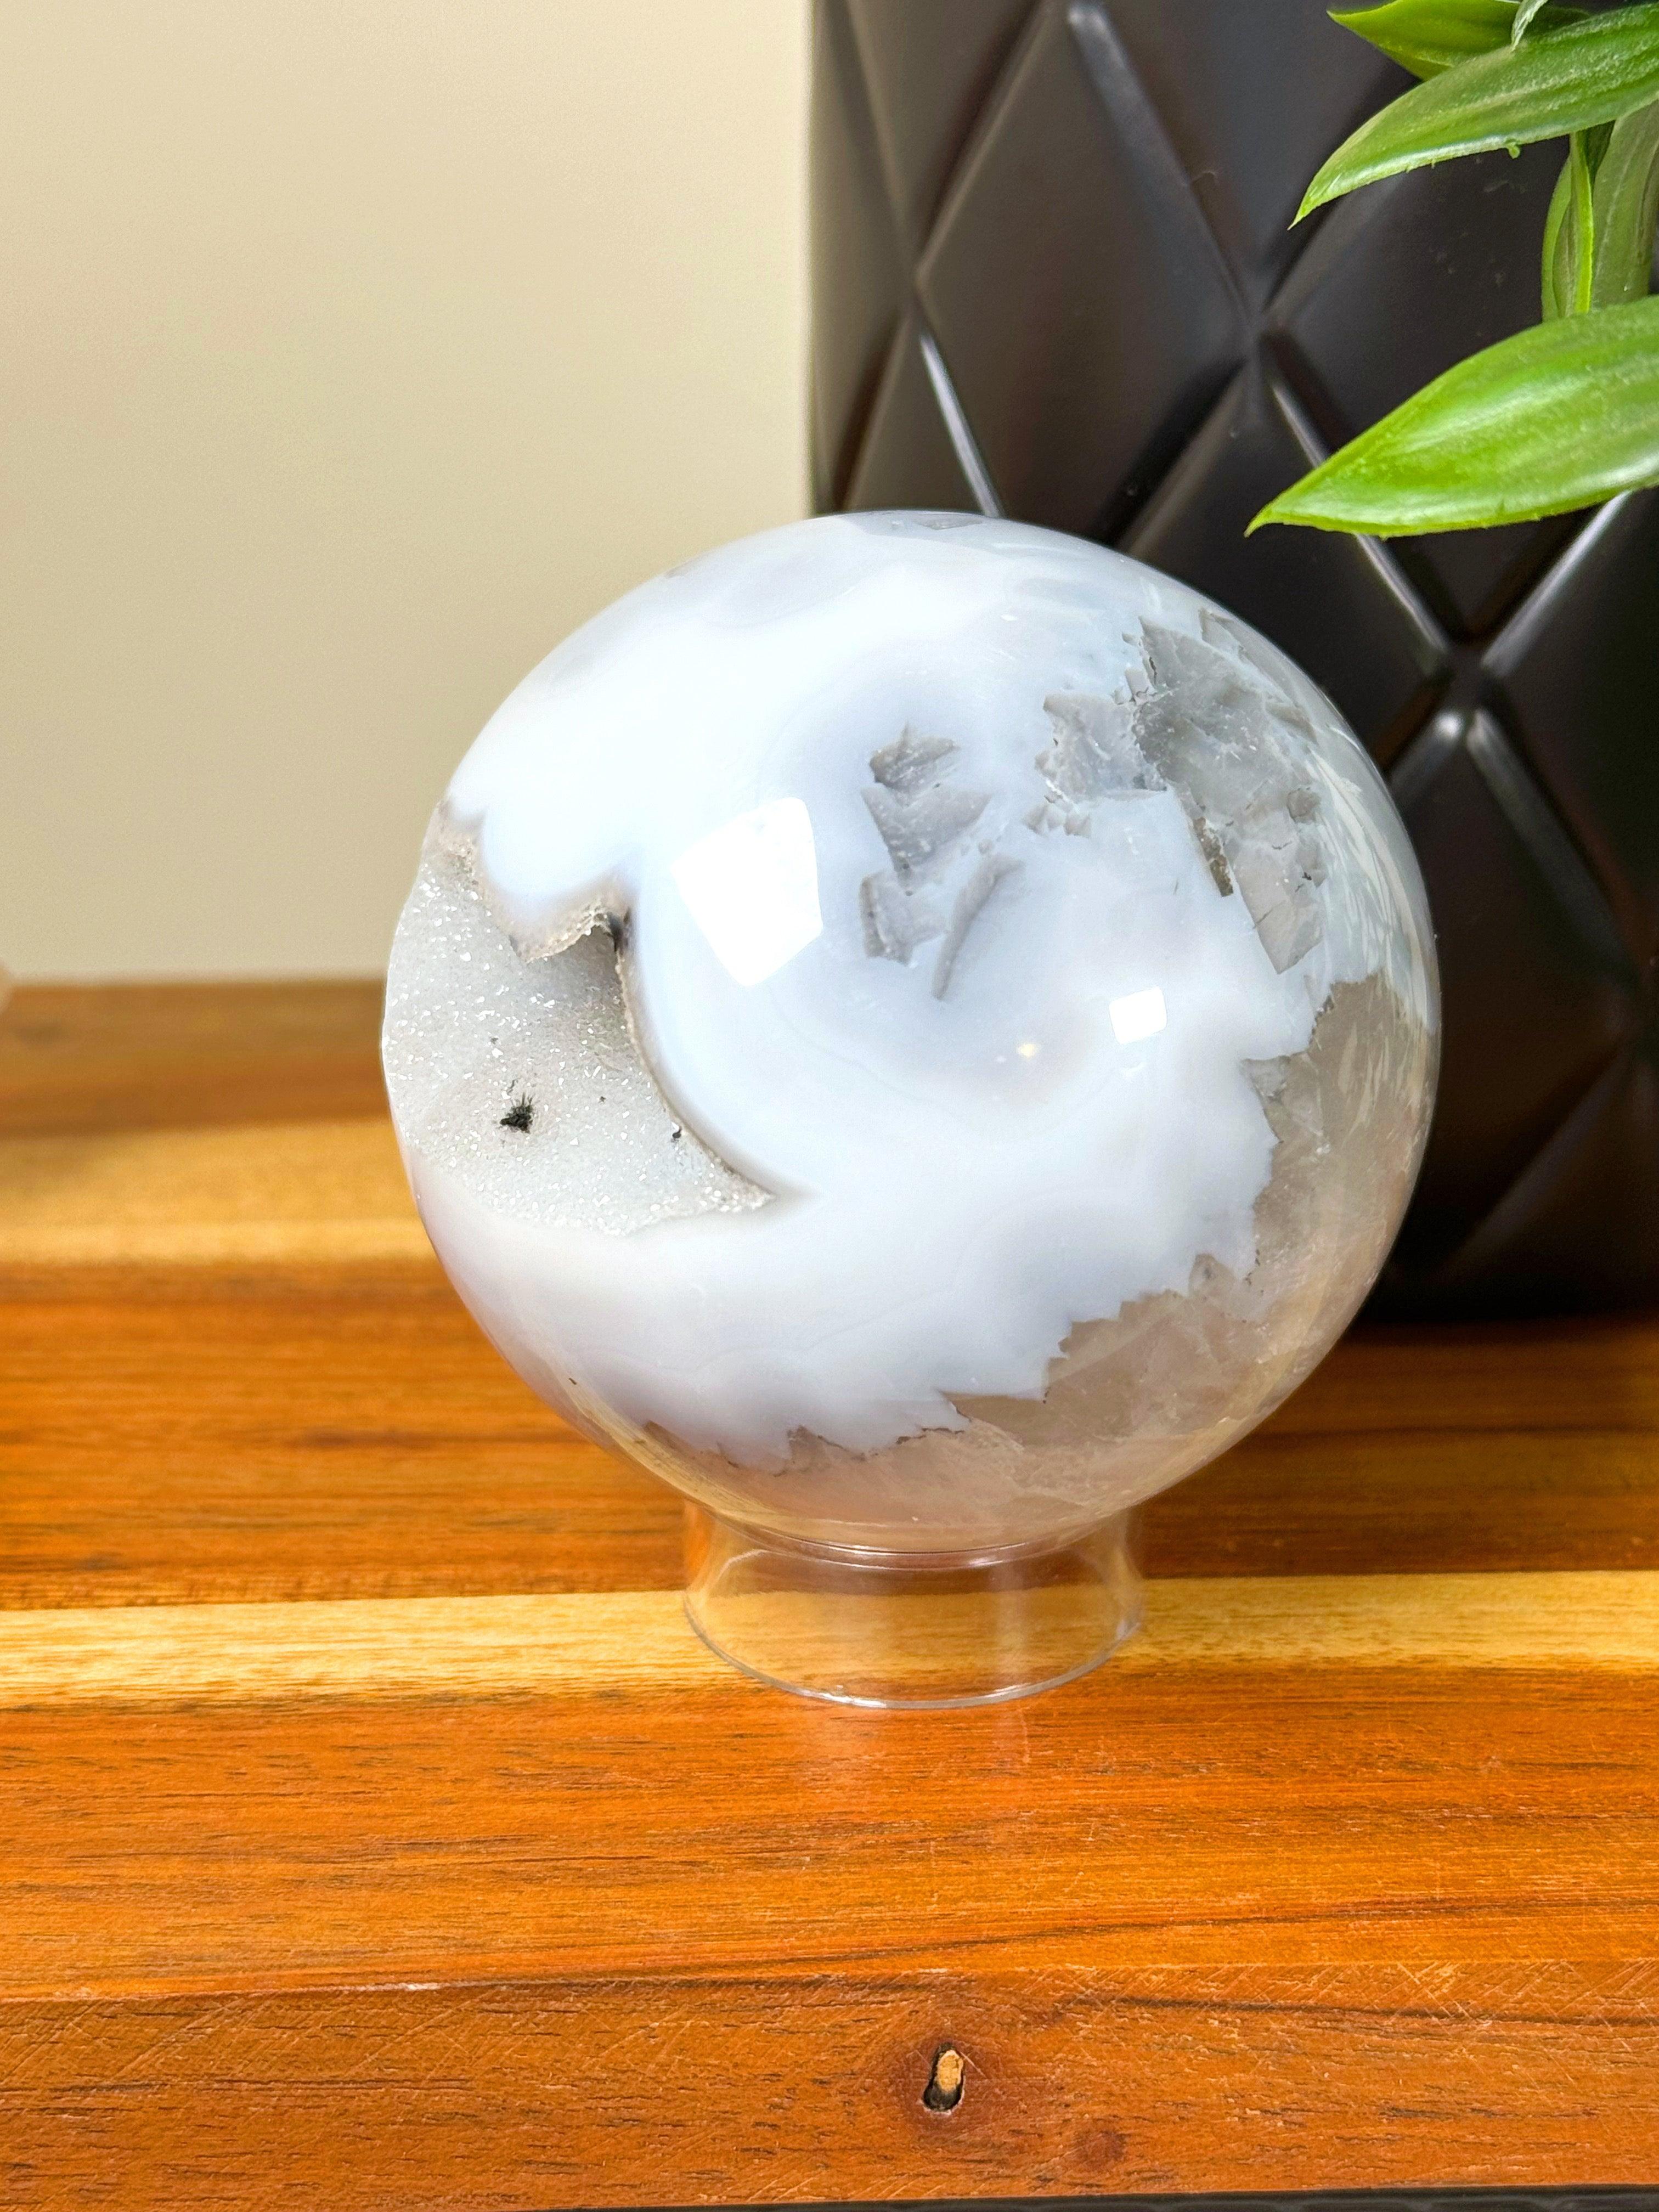 DRUZY AGATE SPHERE 12 - agate, druzy agate, googly agate, googly eye, googly eye agate, one of a kind, sphere, statement piece - The Mineral Maven